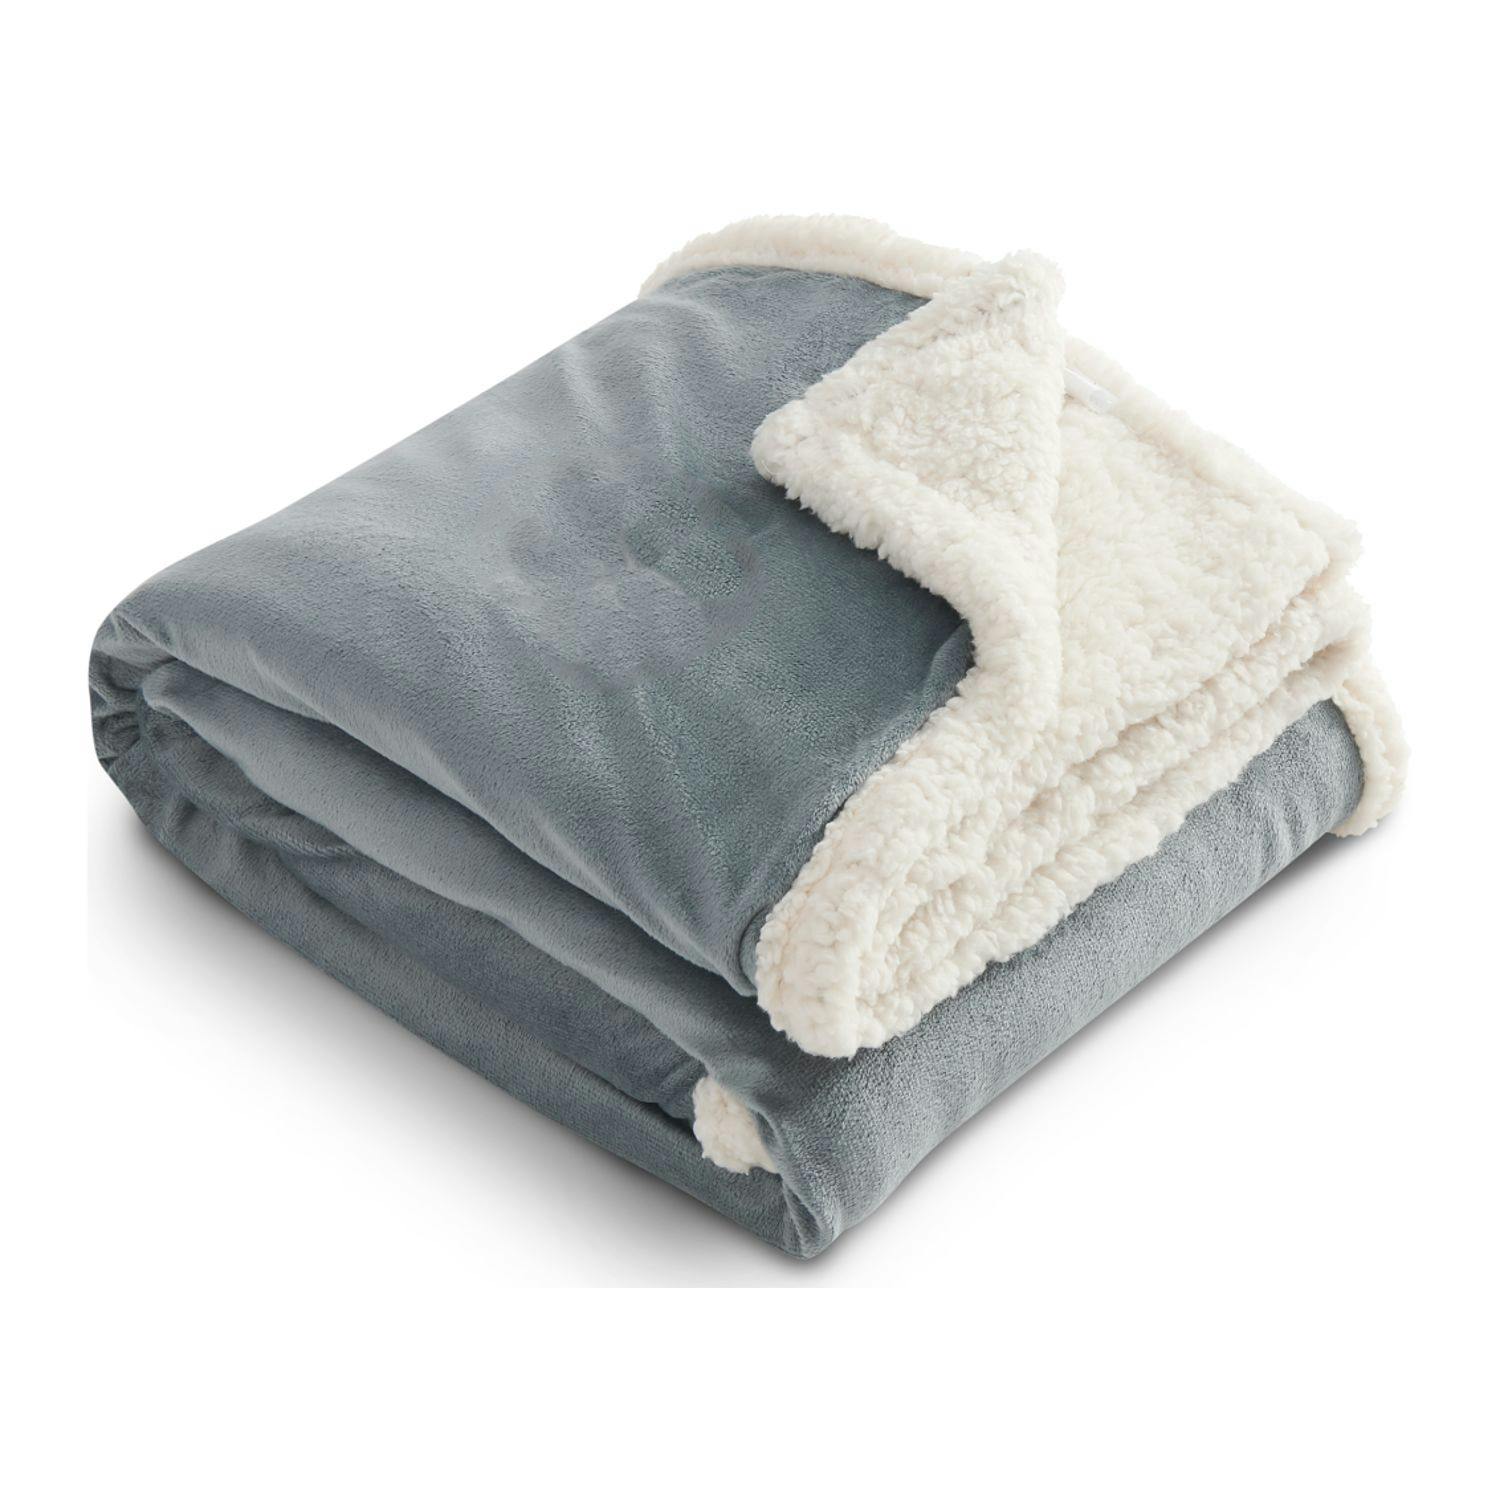 Field & Co.® Sherpa Blanket - additional Image 3